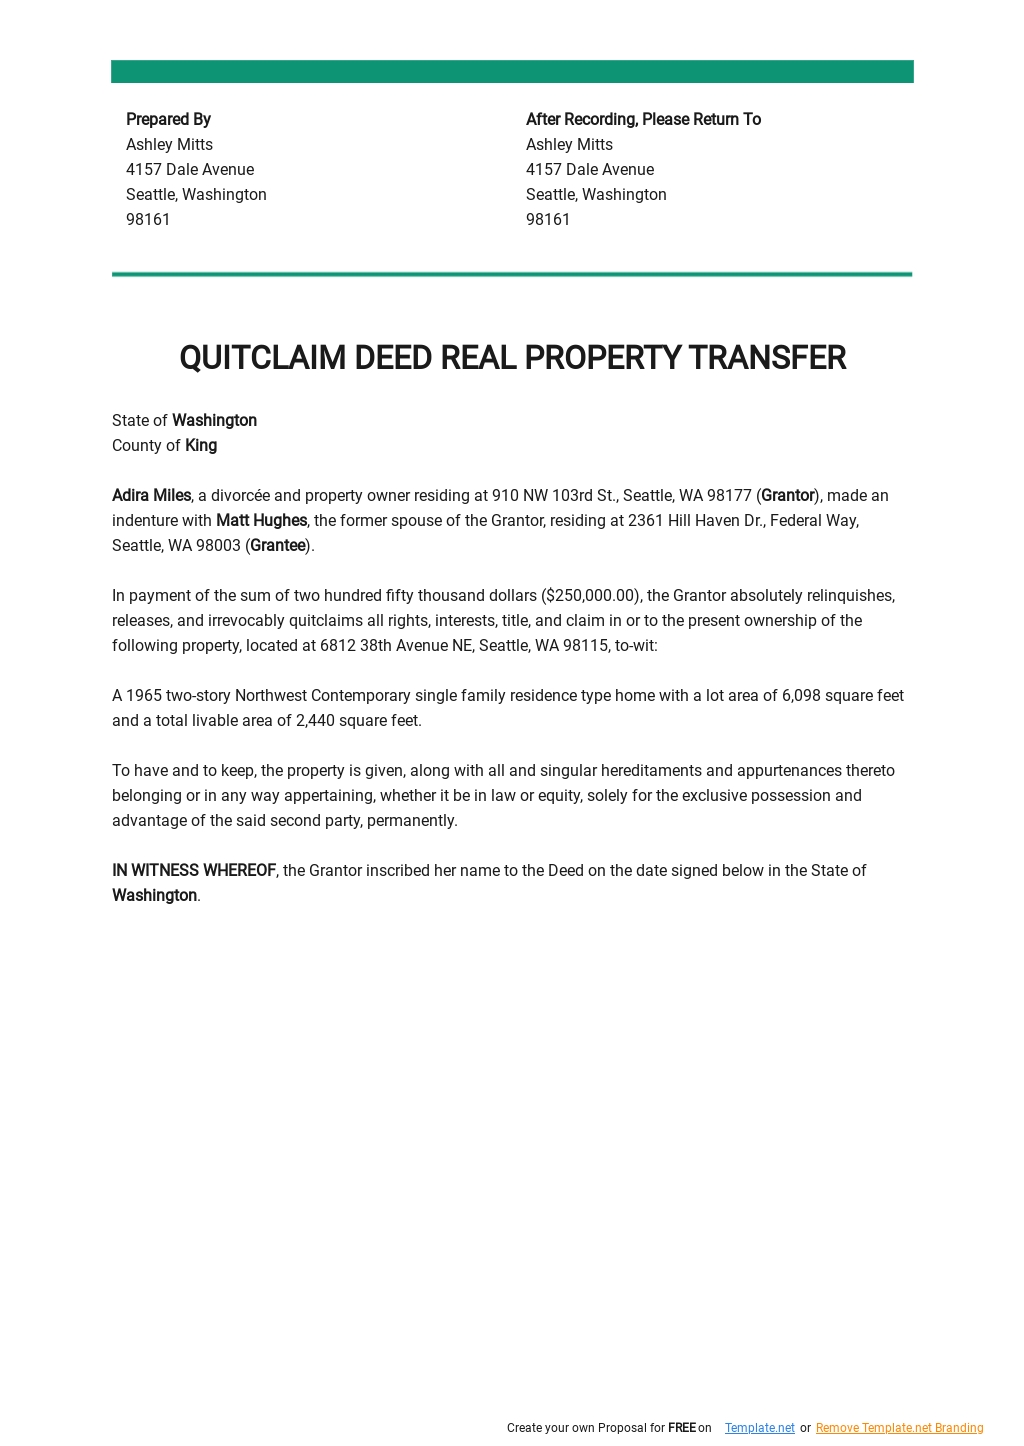 Quit Claim Deed Real Property Transfer Template